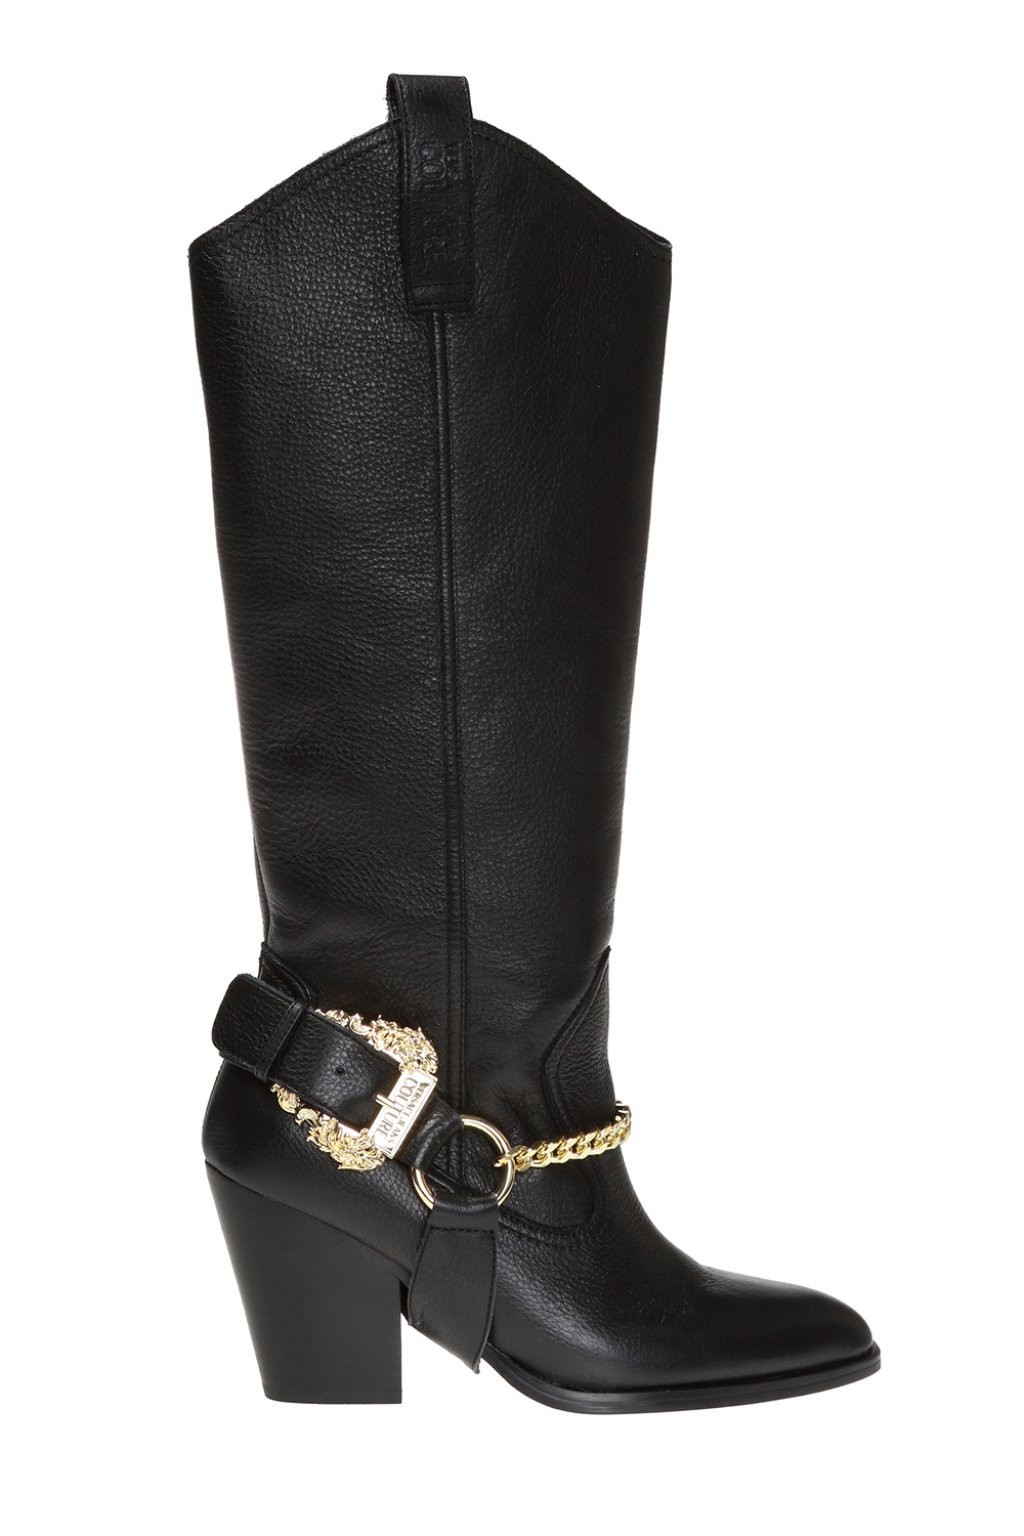 versace jeans boots